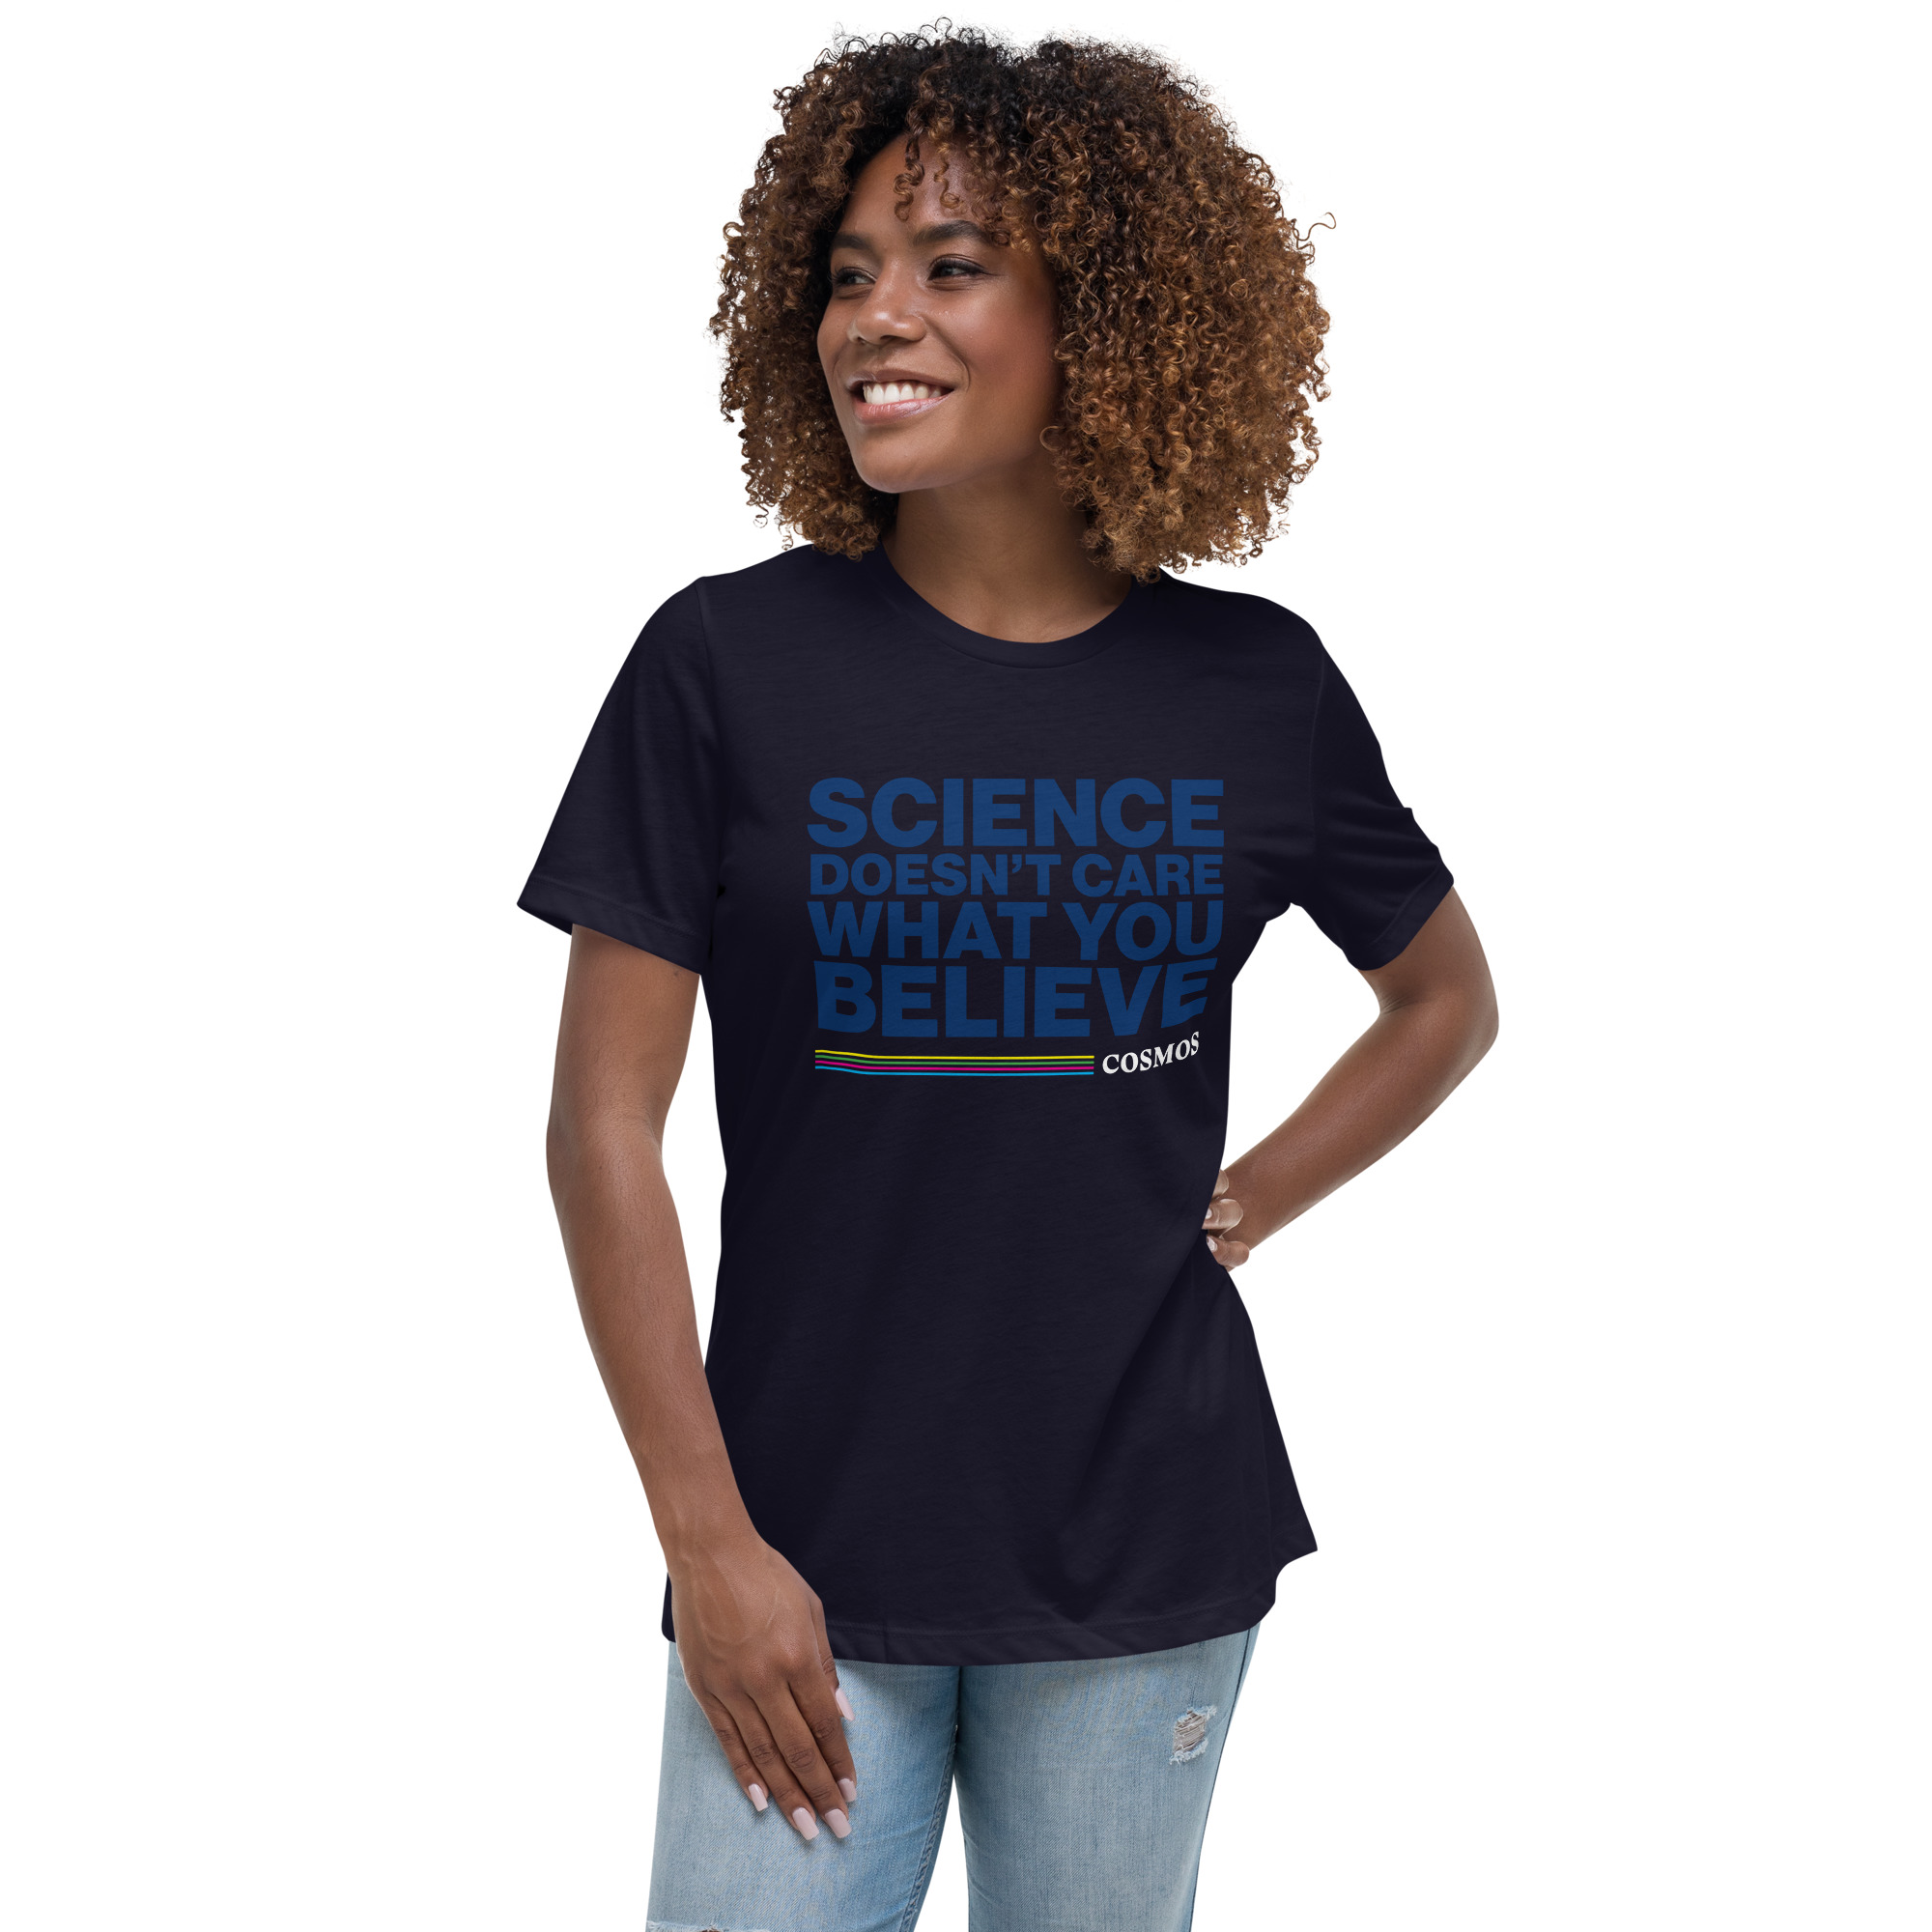 'Science Doesn't Care What You Believe' Women's Navy T-shirt FREE SHIPPING